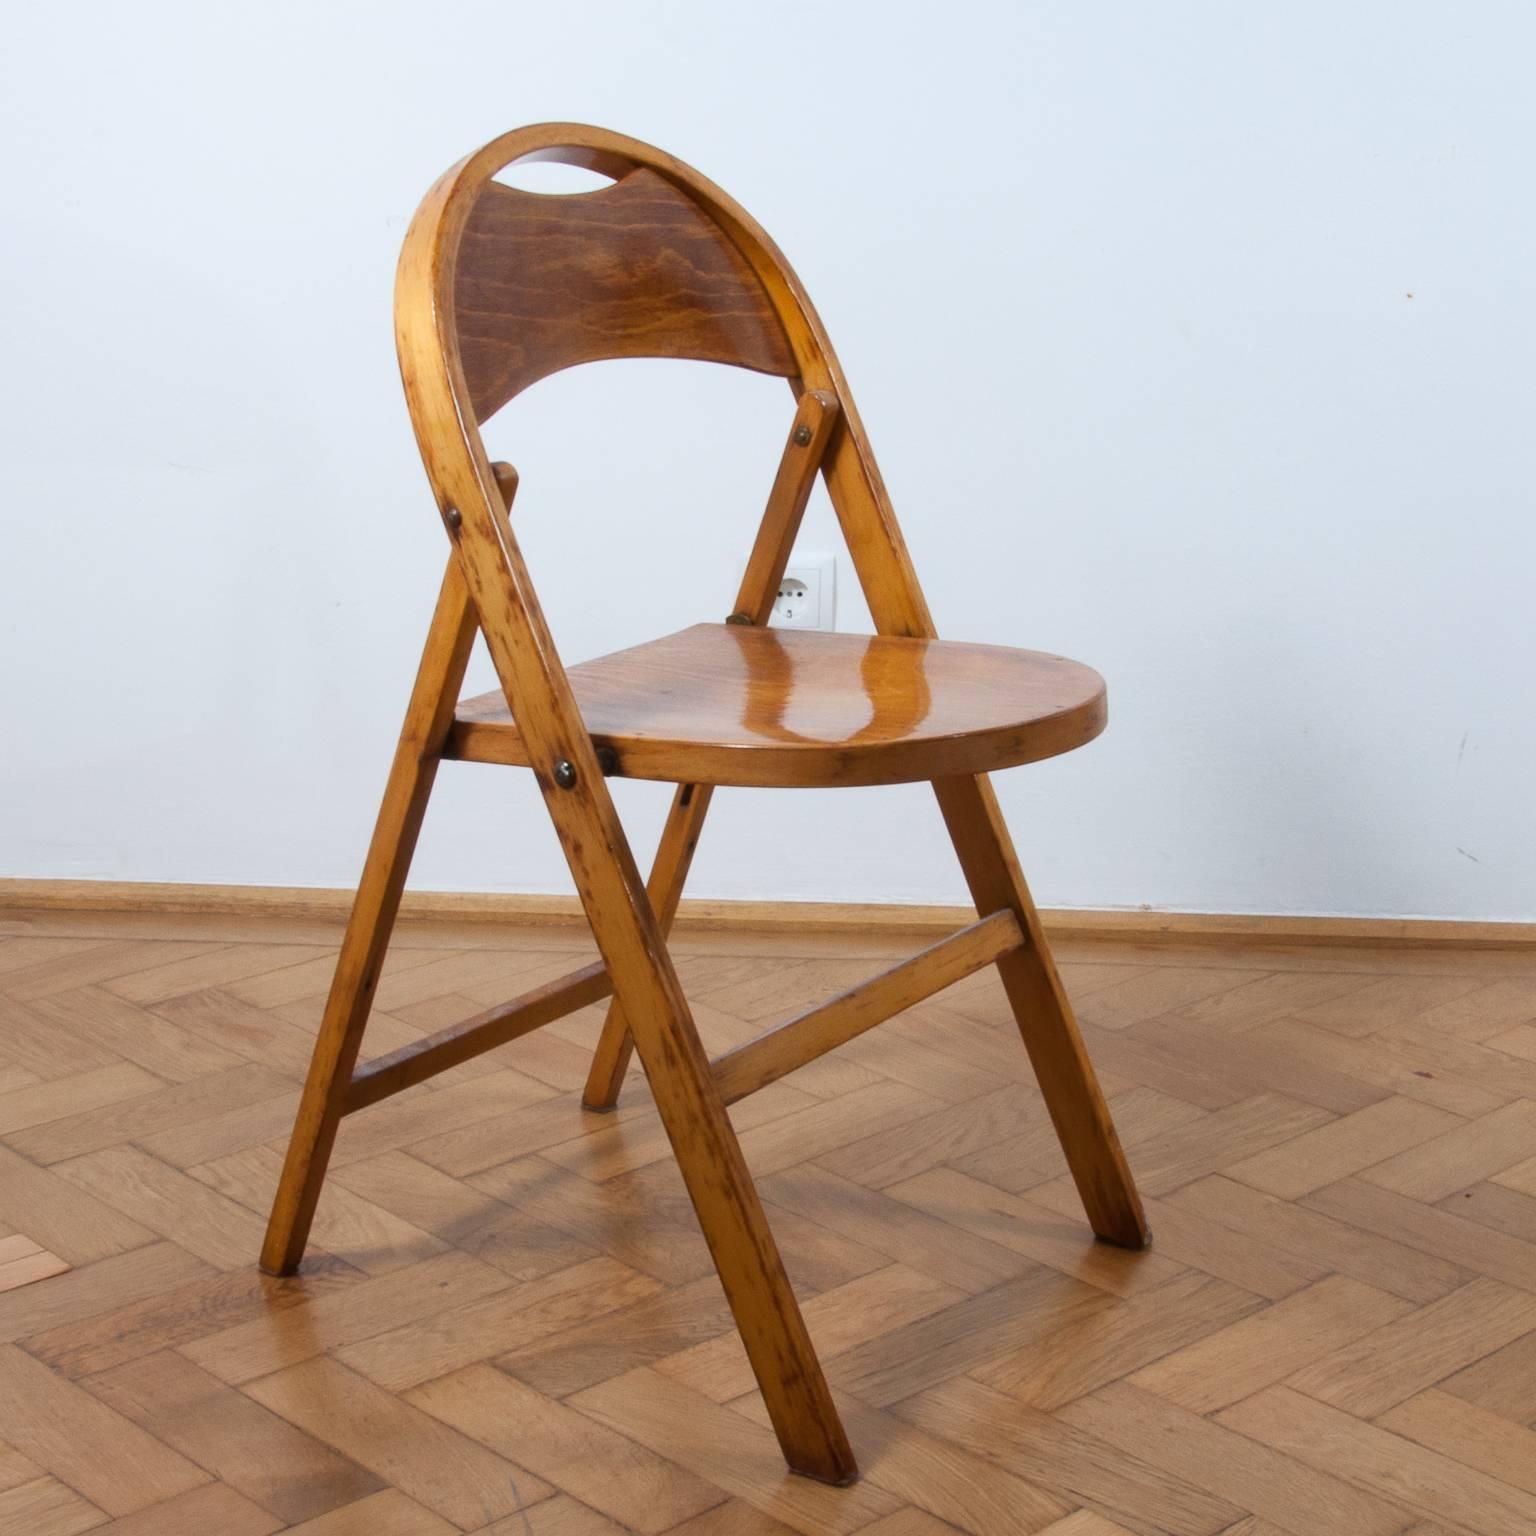 Art Deco Thonet 751 Folding Chair Very Functional and Collectable, Classic Jugendstil For Sale